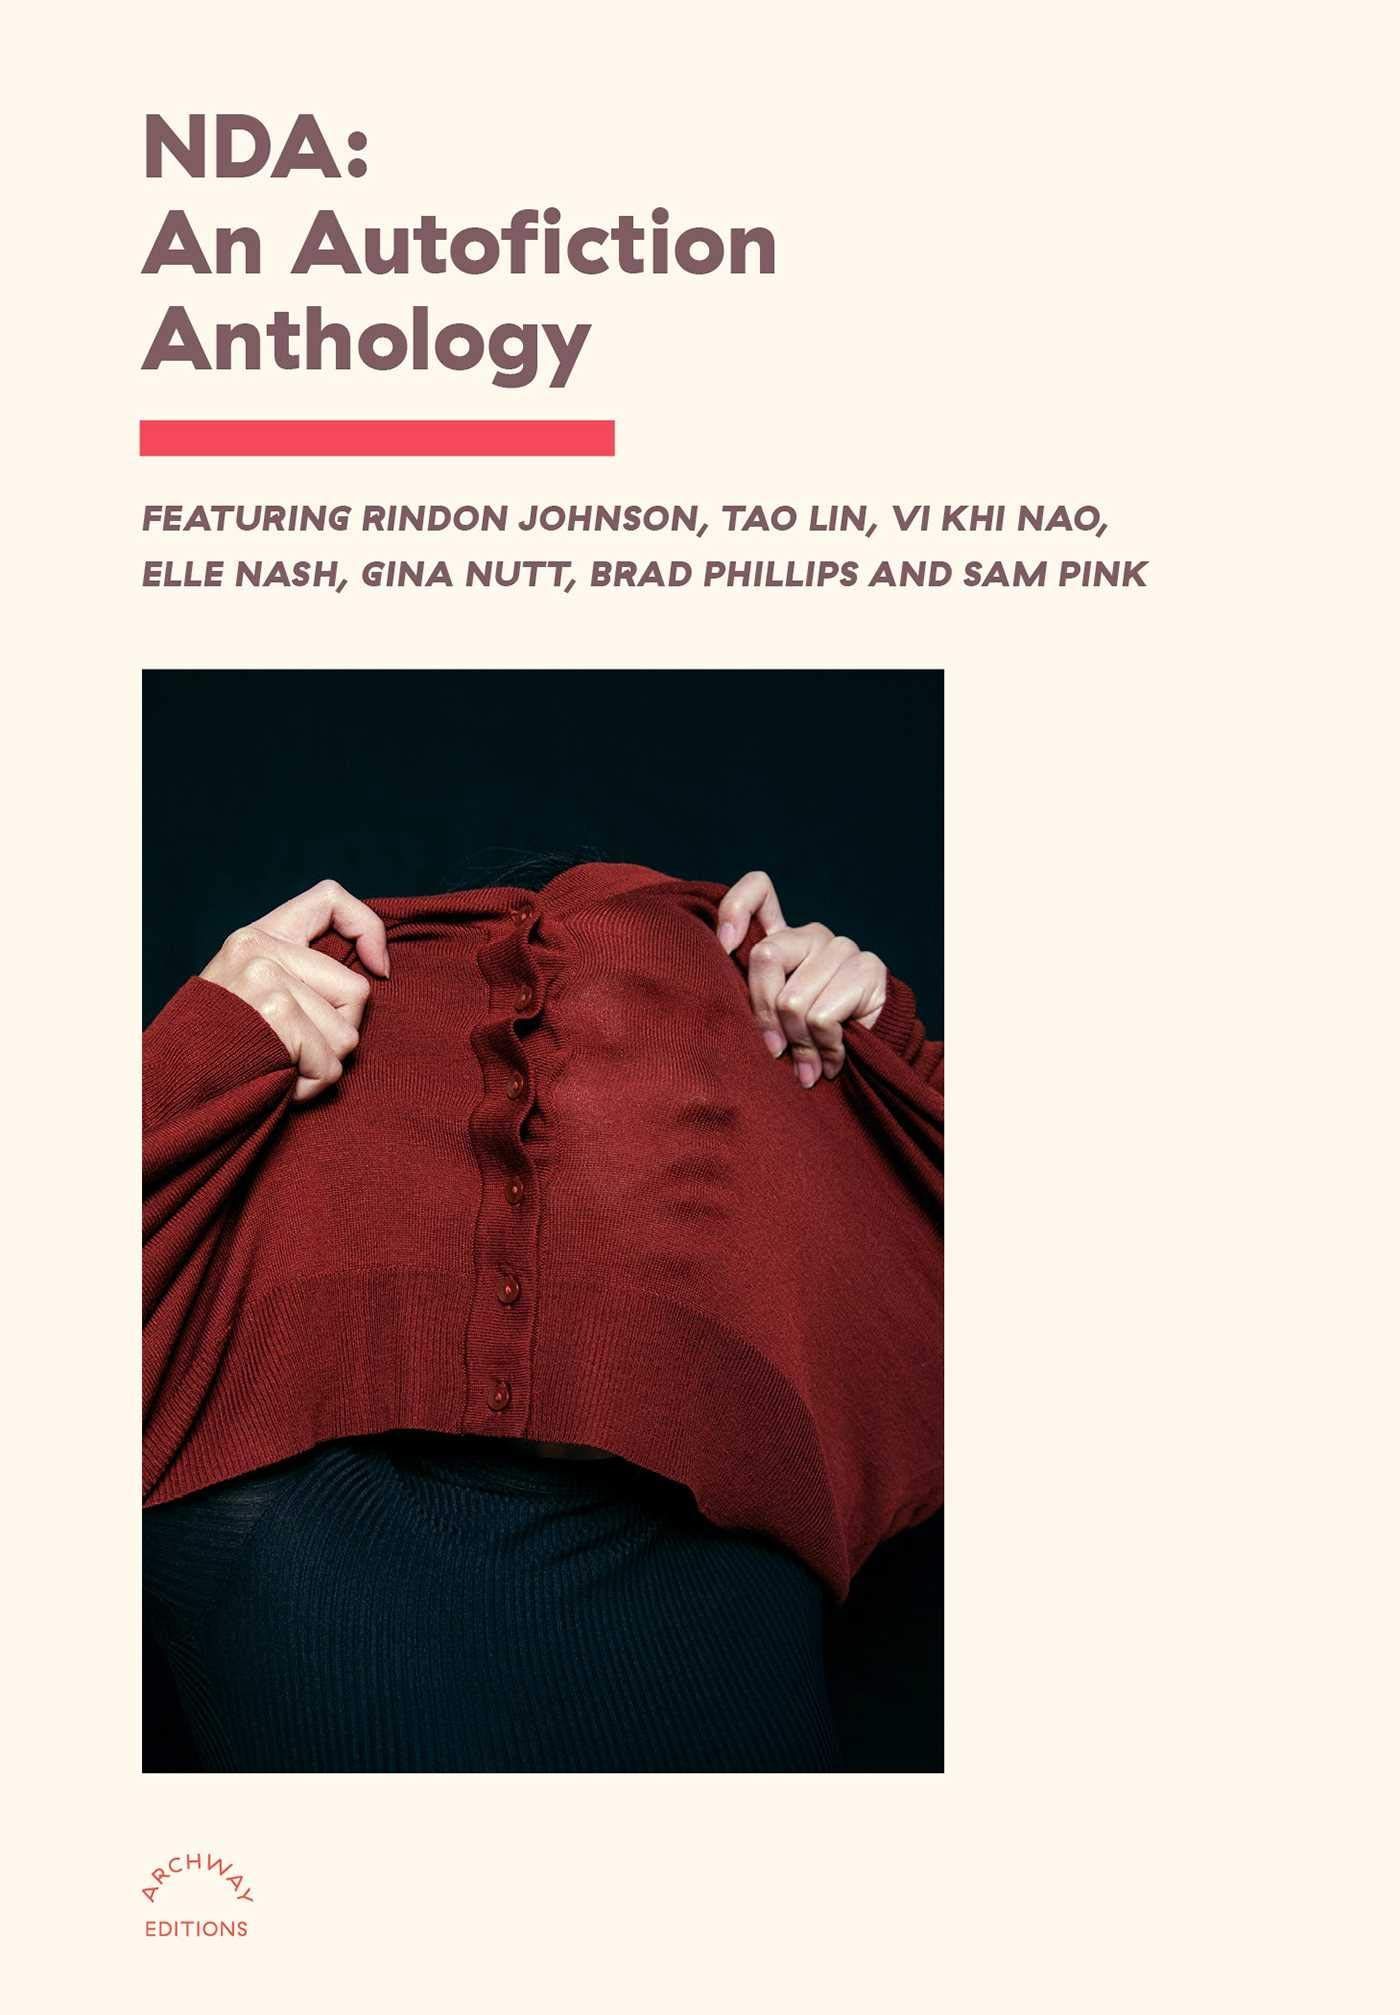 A Quicksand of Narcissism: On Archway Editions’ “NDA” Anthology of Autofiction